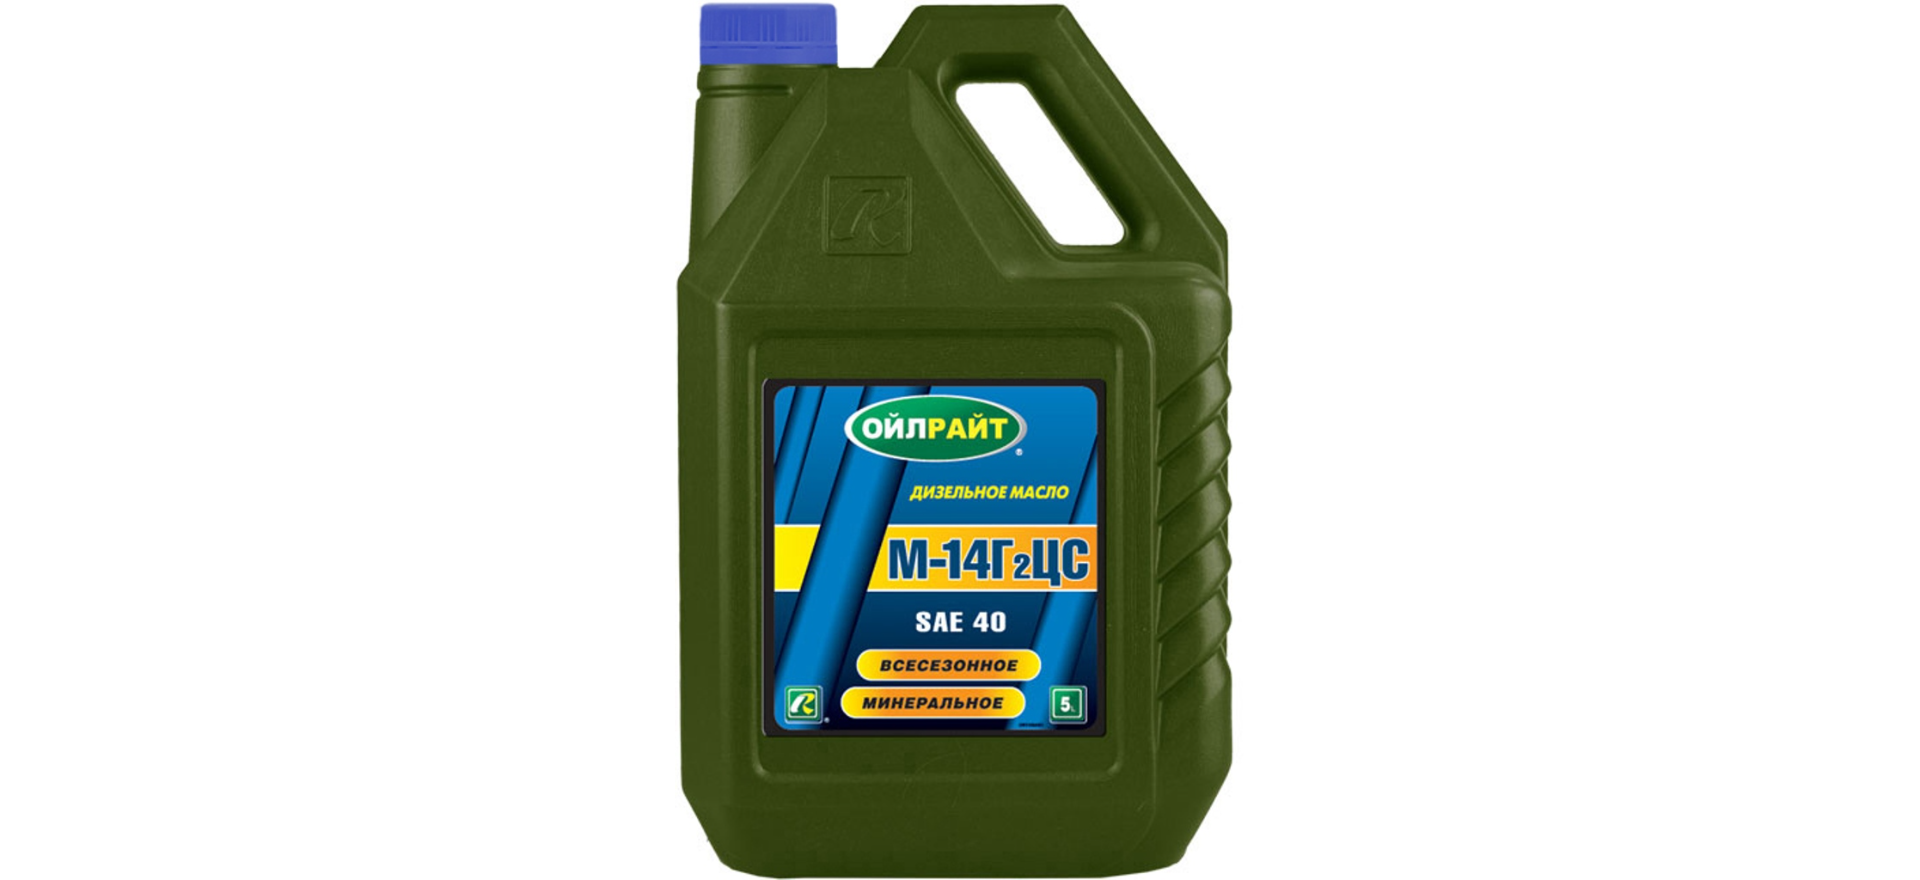 Масло м 10 дм. Масло моторное м10дм Oil right 10л. Масло OILRIGHT моторное м10 дм дизель 10л. Devon м-10дм SAE 30. Моторное масло OILRIGHT М-8дм 30 л.